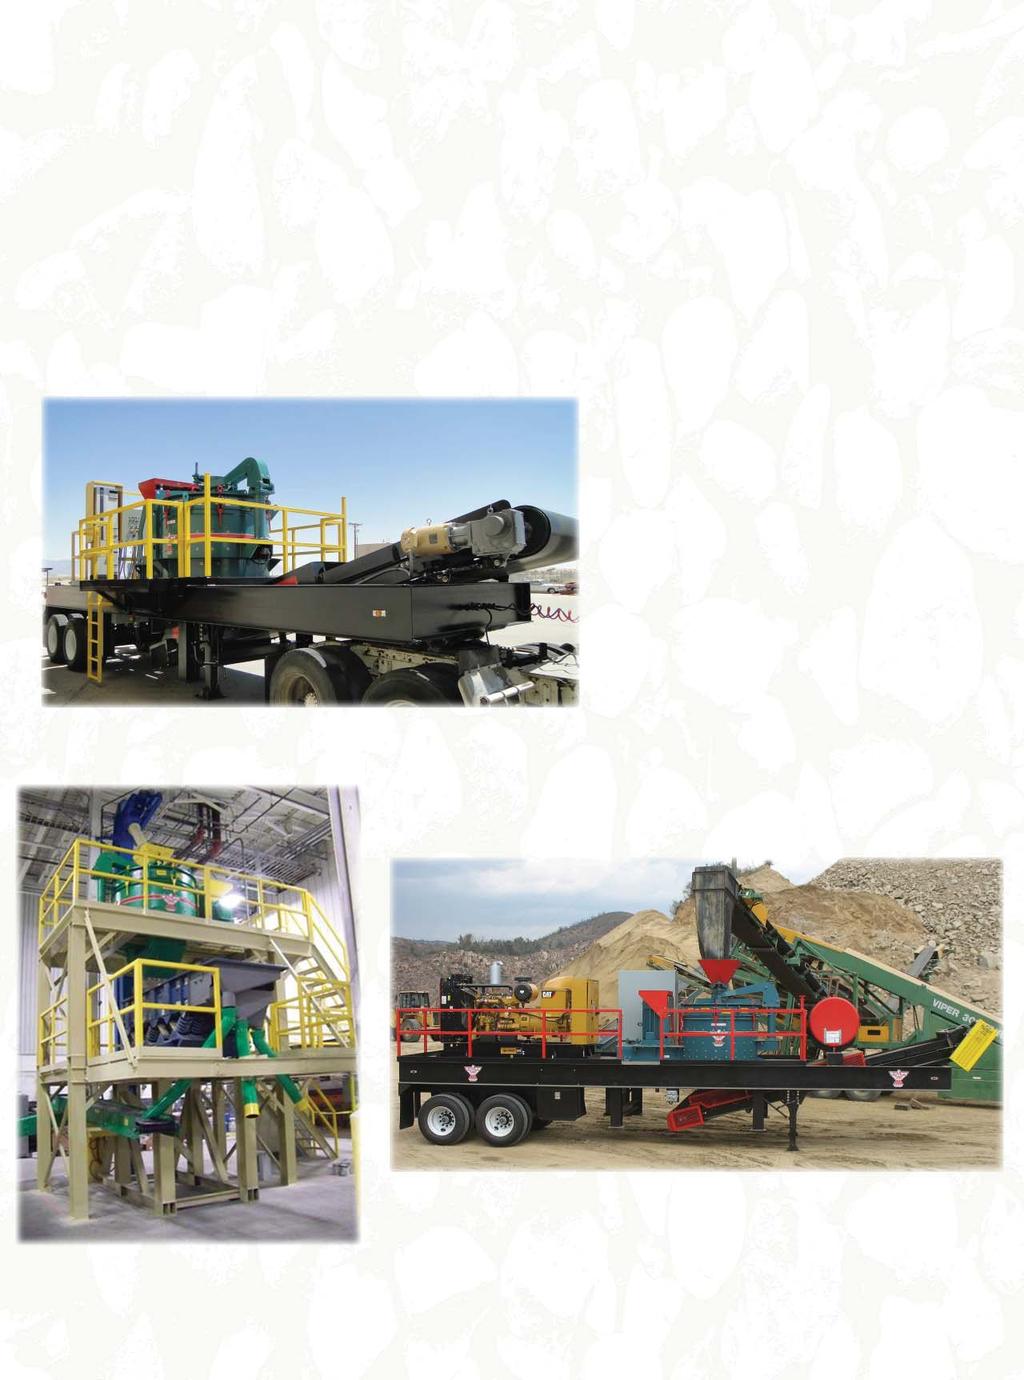 Customize Your Crusher CEMCO has been designing and manufacturing crushing solutions since 1962. Our company has hundreds of crusher installations in 26 countries around the world.